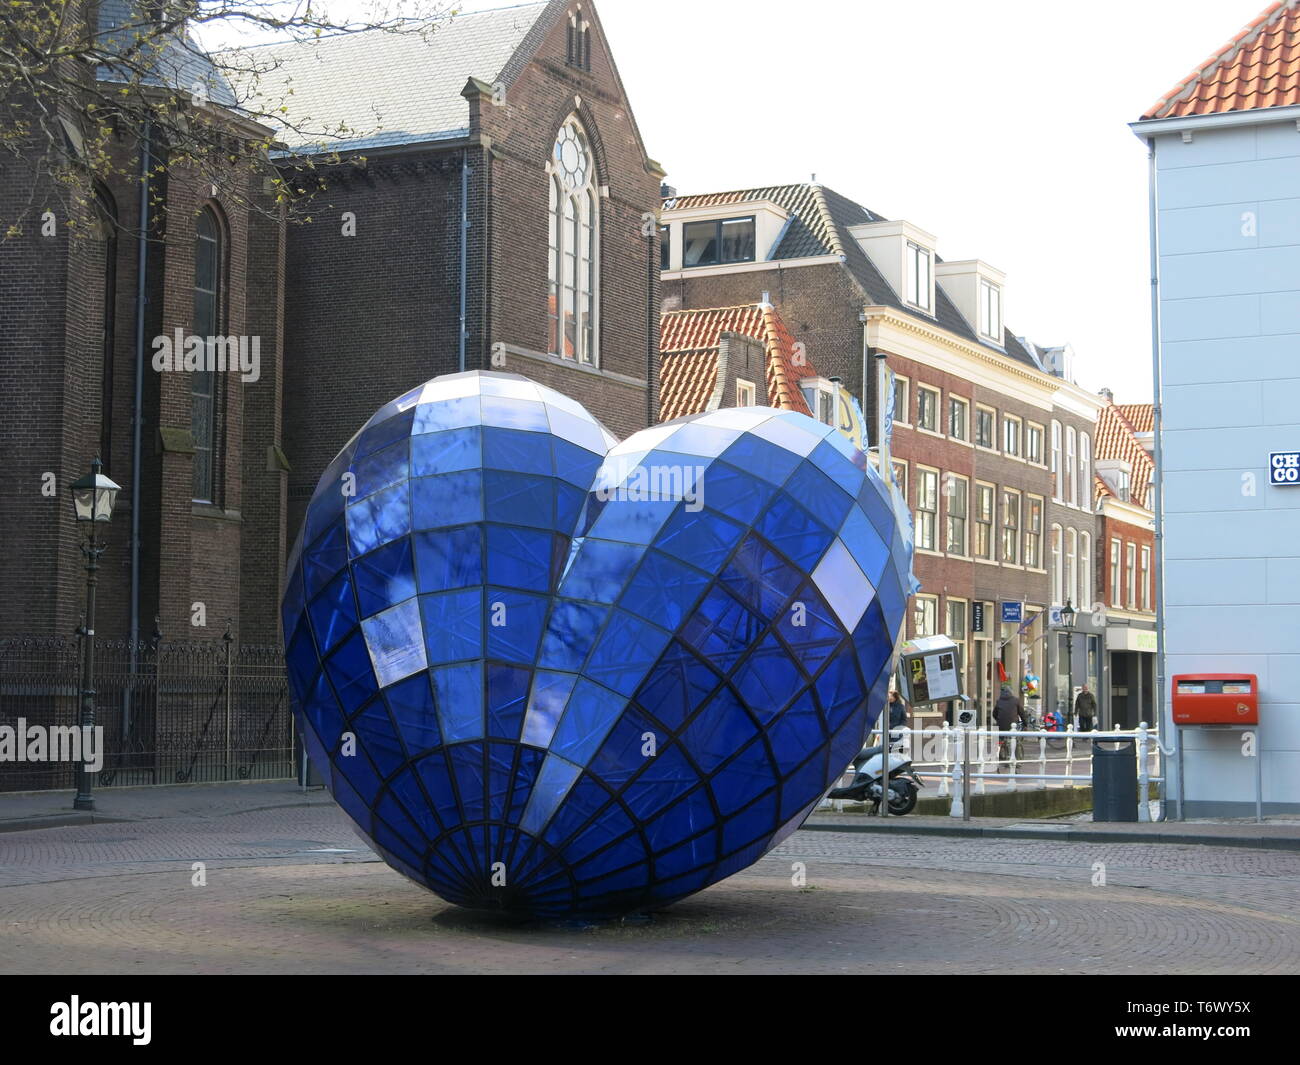 A large street sculpture in the shape of a heart in the Royal Delft blue colour as a tribute to the heritage of pottery production in the town. Stock Photo